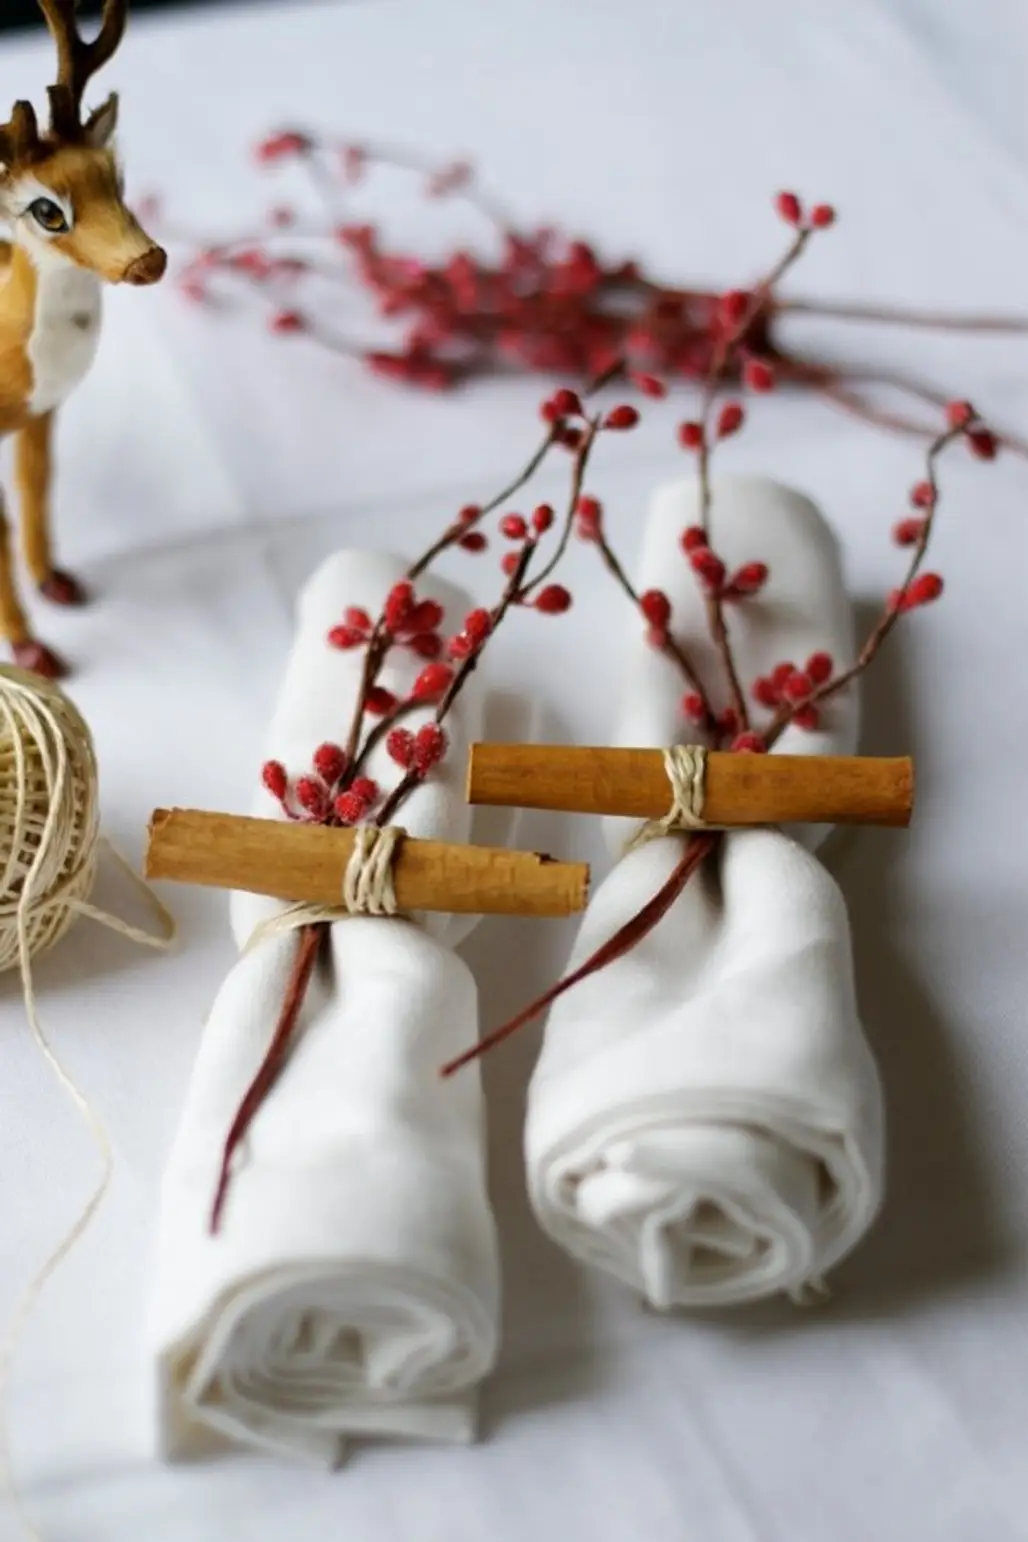 White Napkins with Cinnamon Sticks and Red Berries